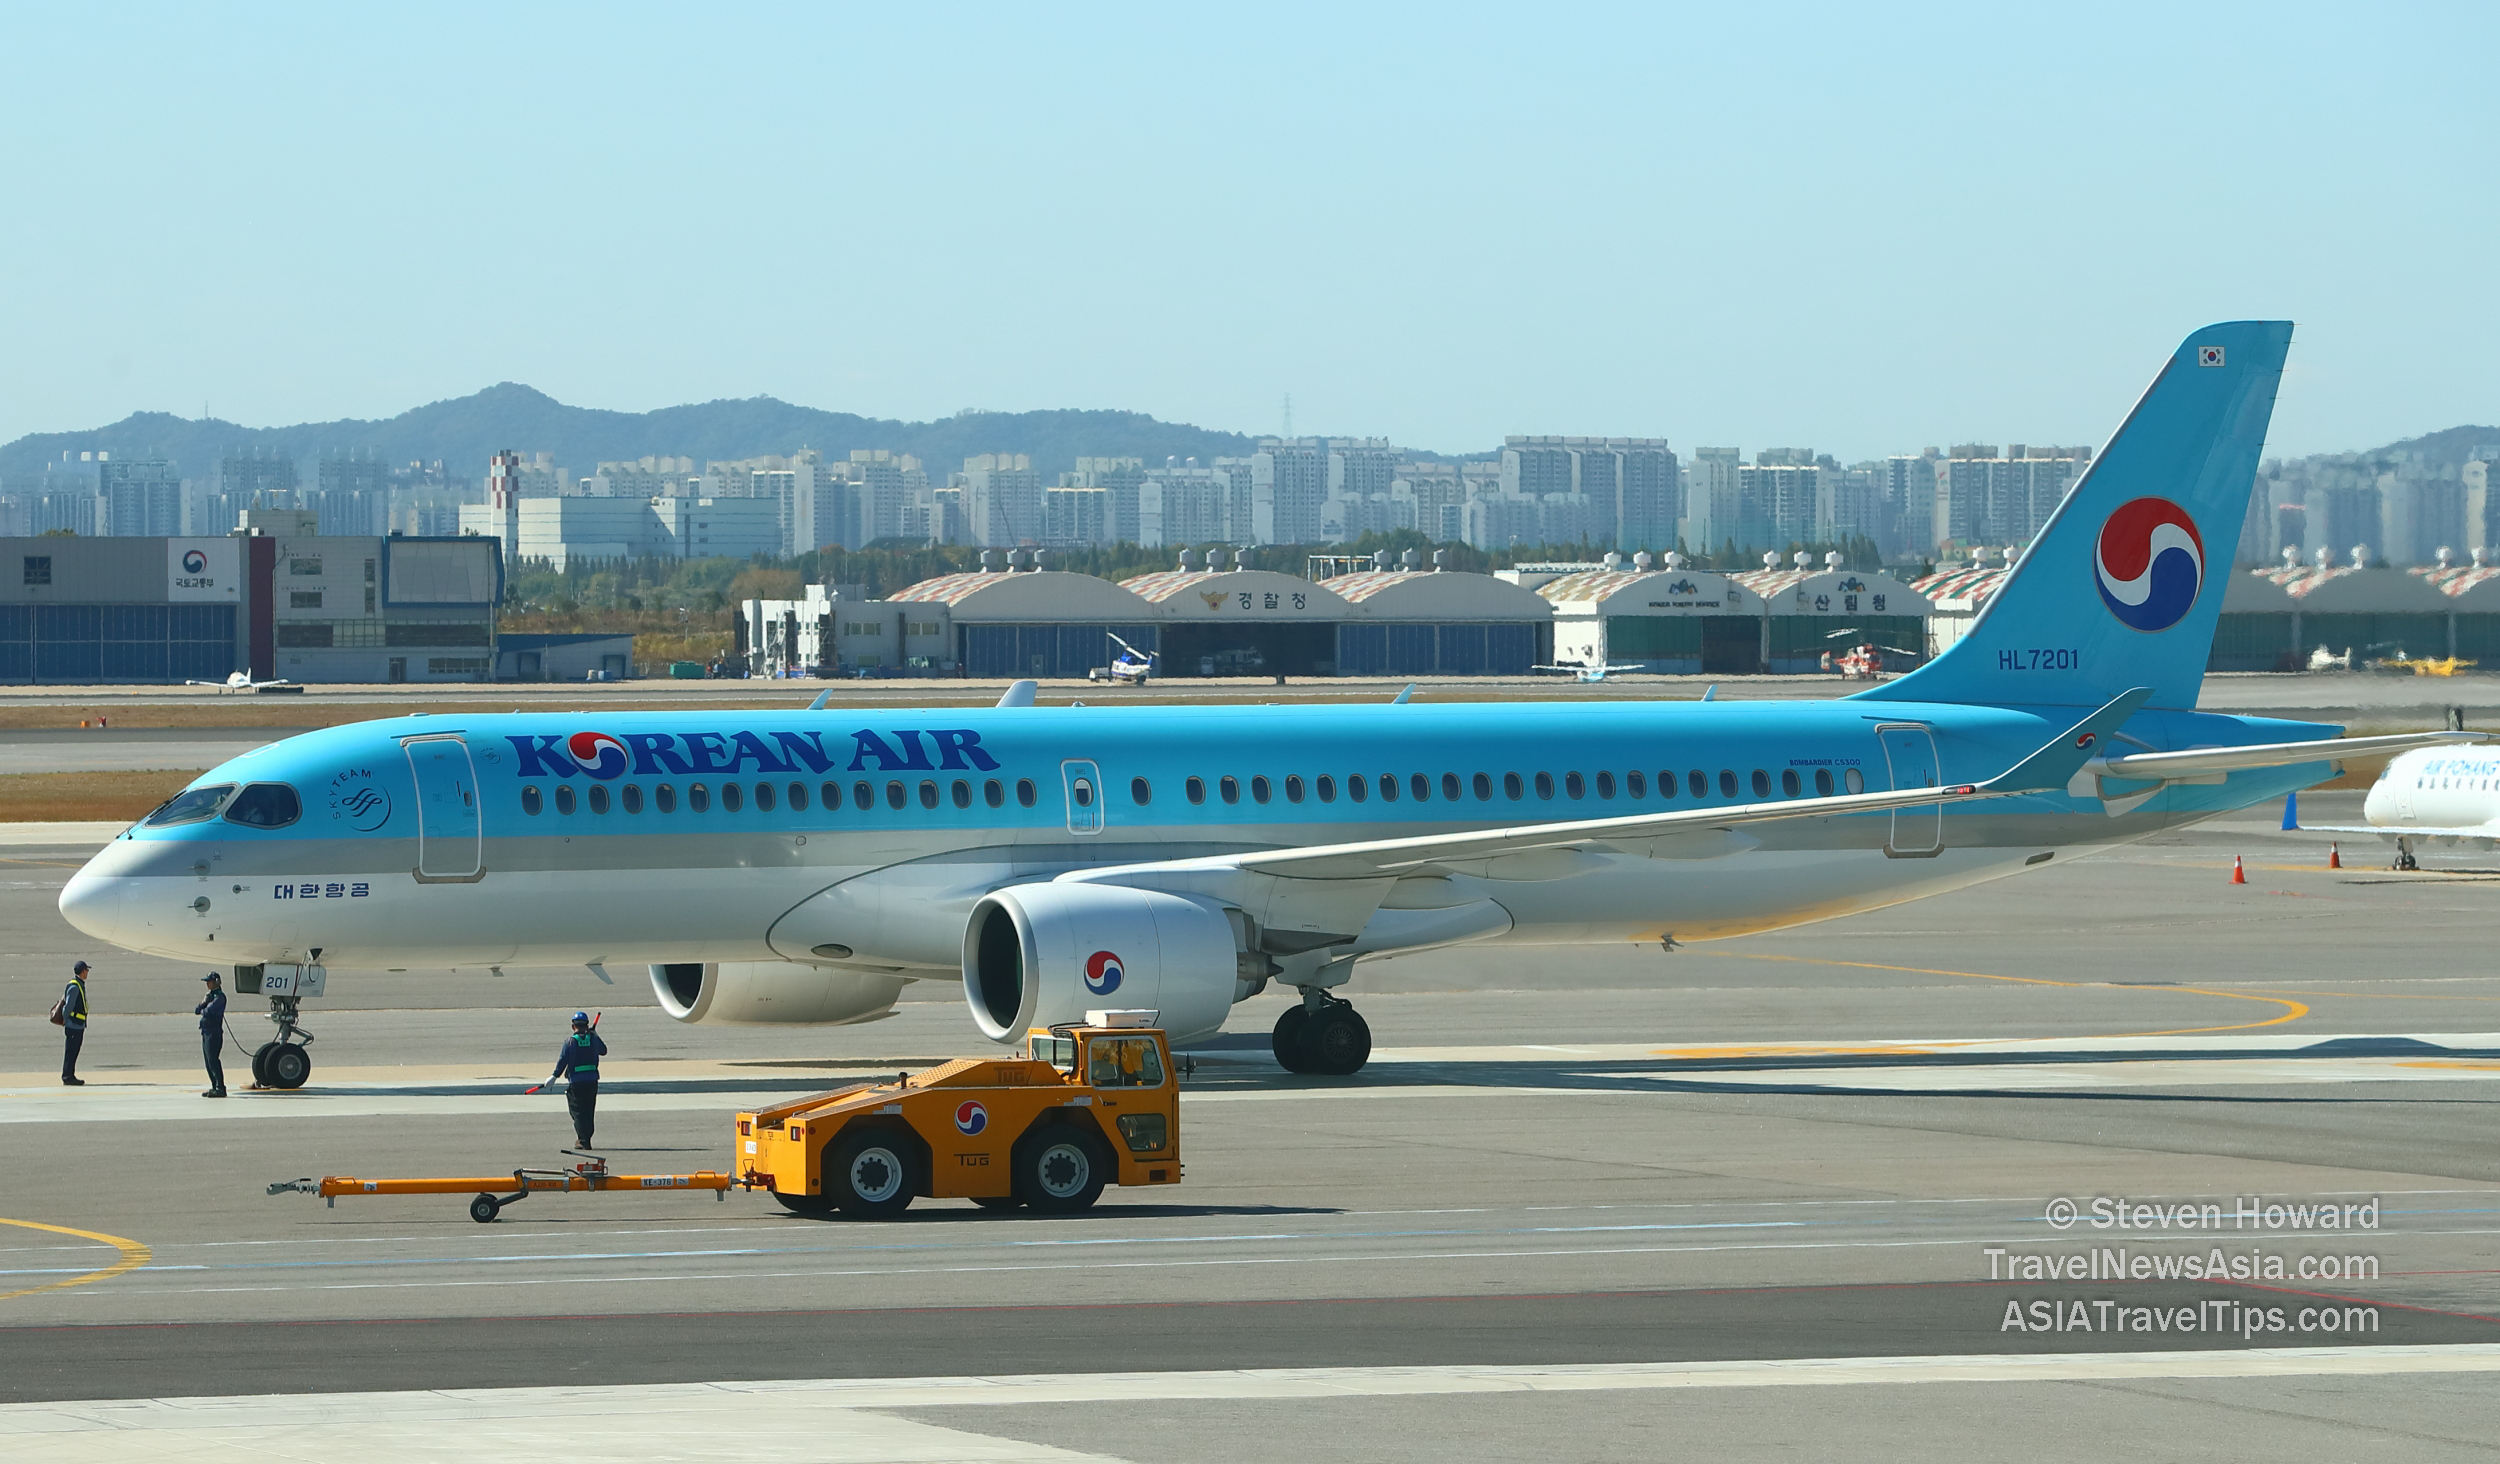 Korean Air Airbus A220-300 (CS300) reg: HL7201. Picture taken by Steven Howard of TravelNewsAsia.com on 17 October 2018 at Gimpo Int. Airport in Seoul, South Korea. Click to enlarge.